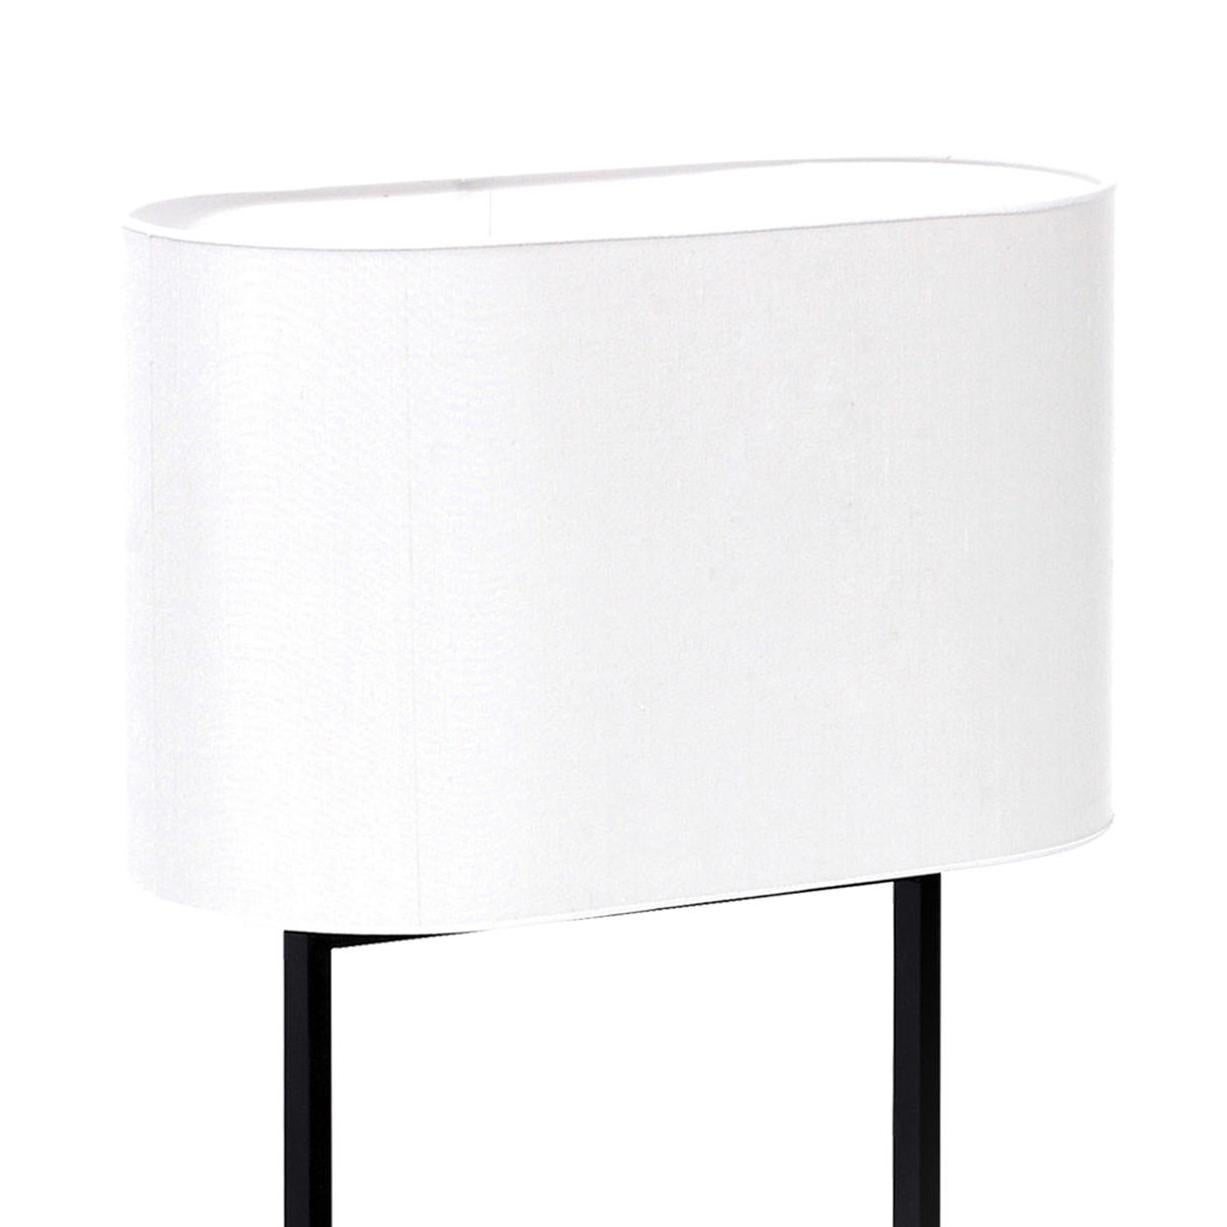 Table lamp designed by Peter Ghyczy in 2003.
Manufactured by Ghyczy (Netherlands)

The table lamp is designed to showcase a piece of art on the pedestal. The frame is made of 1 × 2 cm tubes. The pedestal is held by 2 casted clamps. The lamp has a